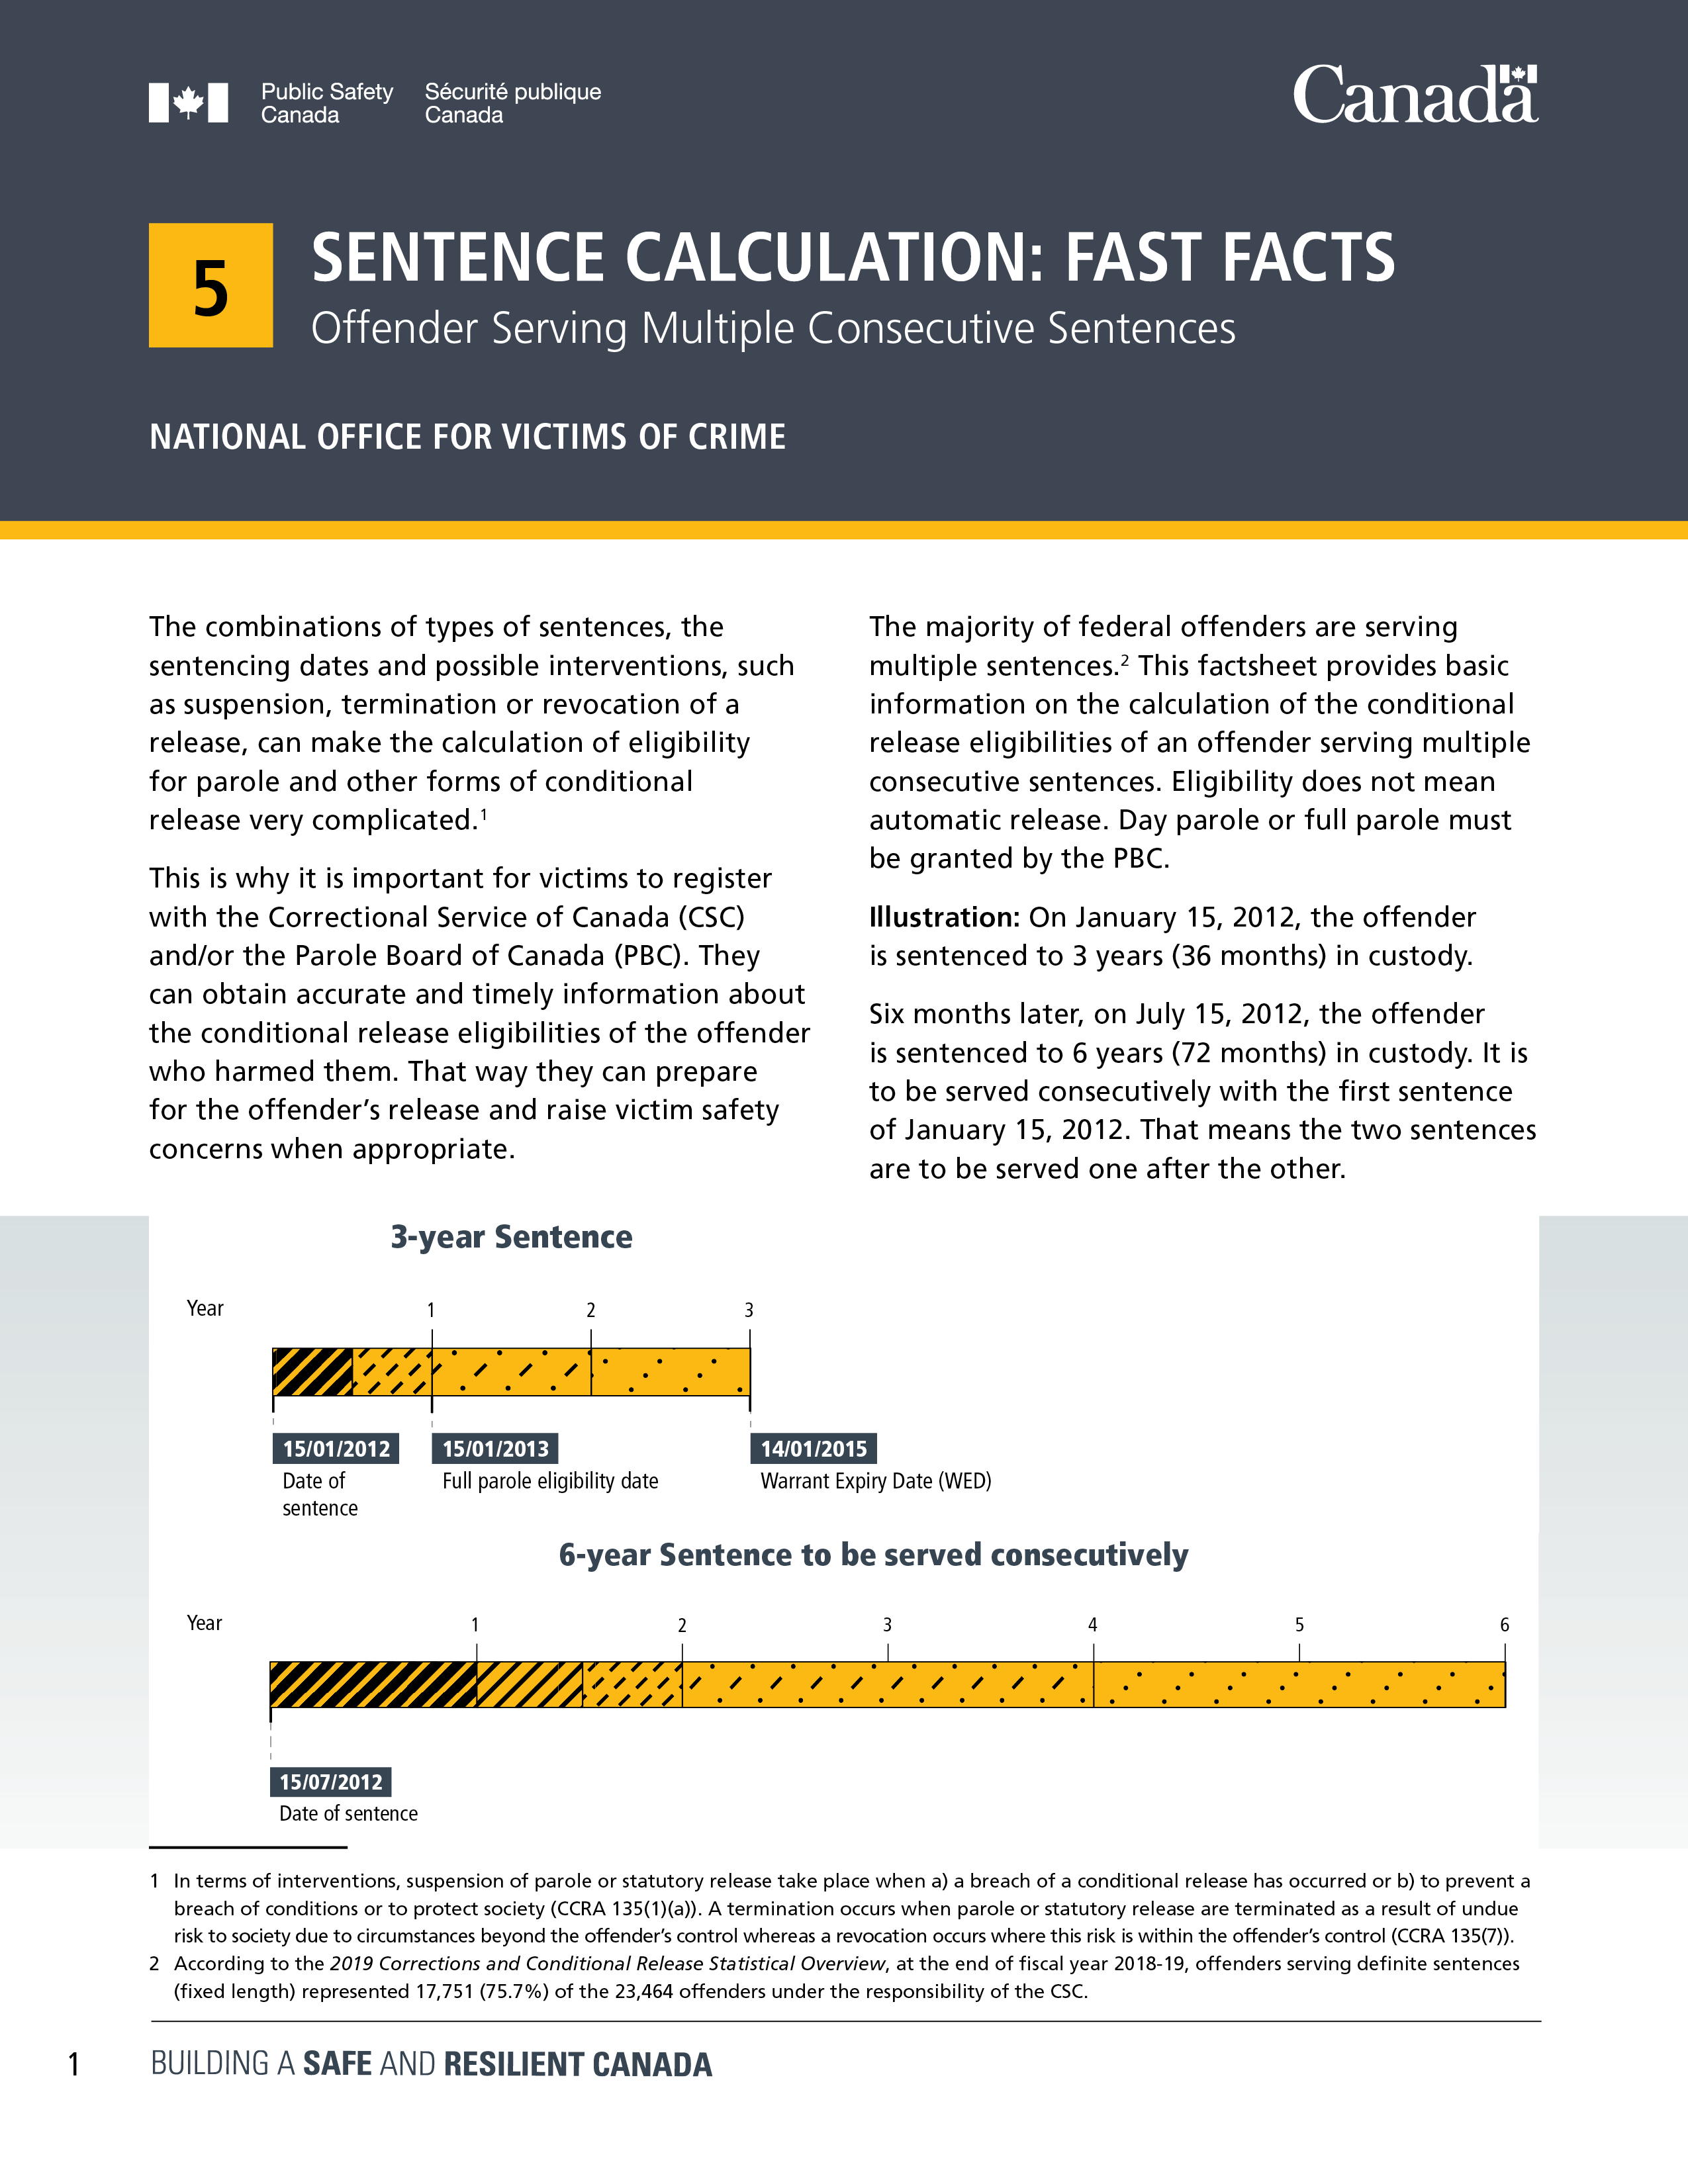 Sentence Calculation: Fast Facts: Offenders Serving Multiple Consecutive Sentences